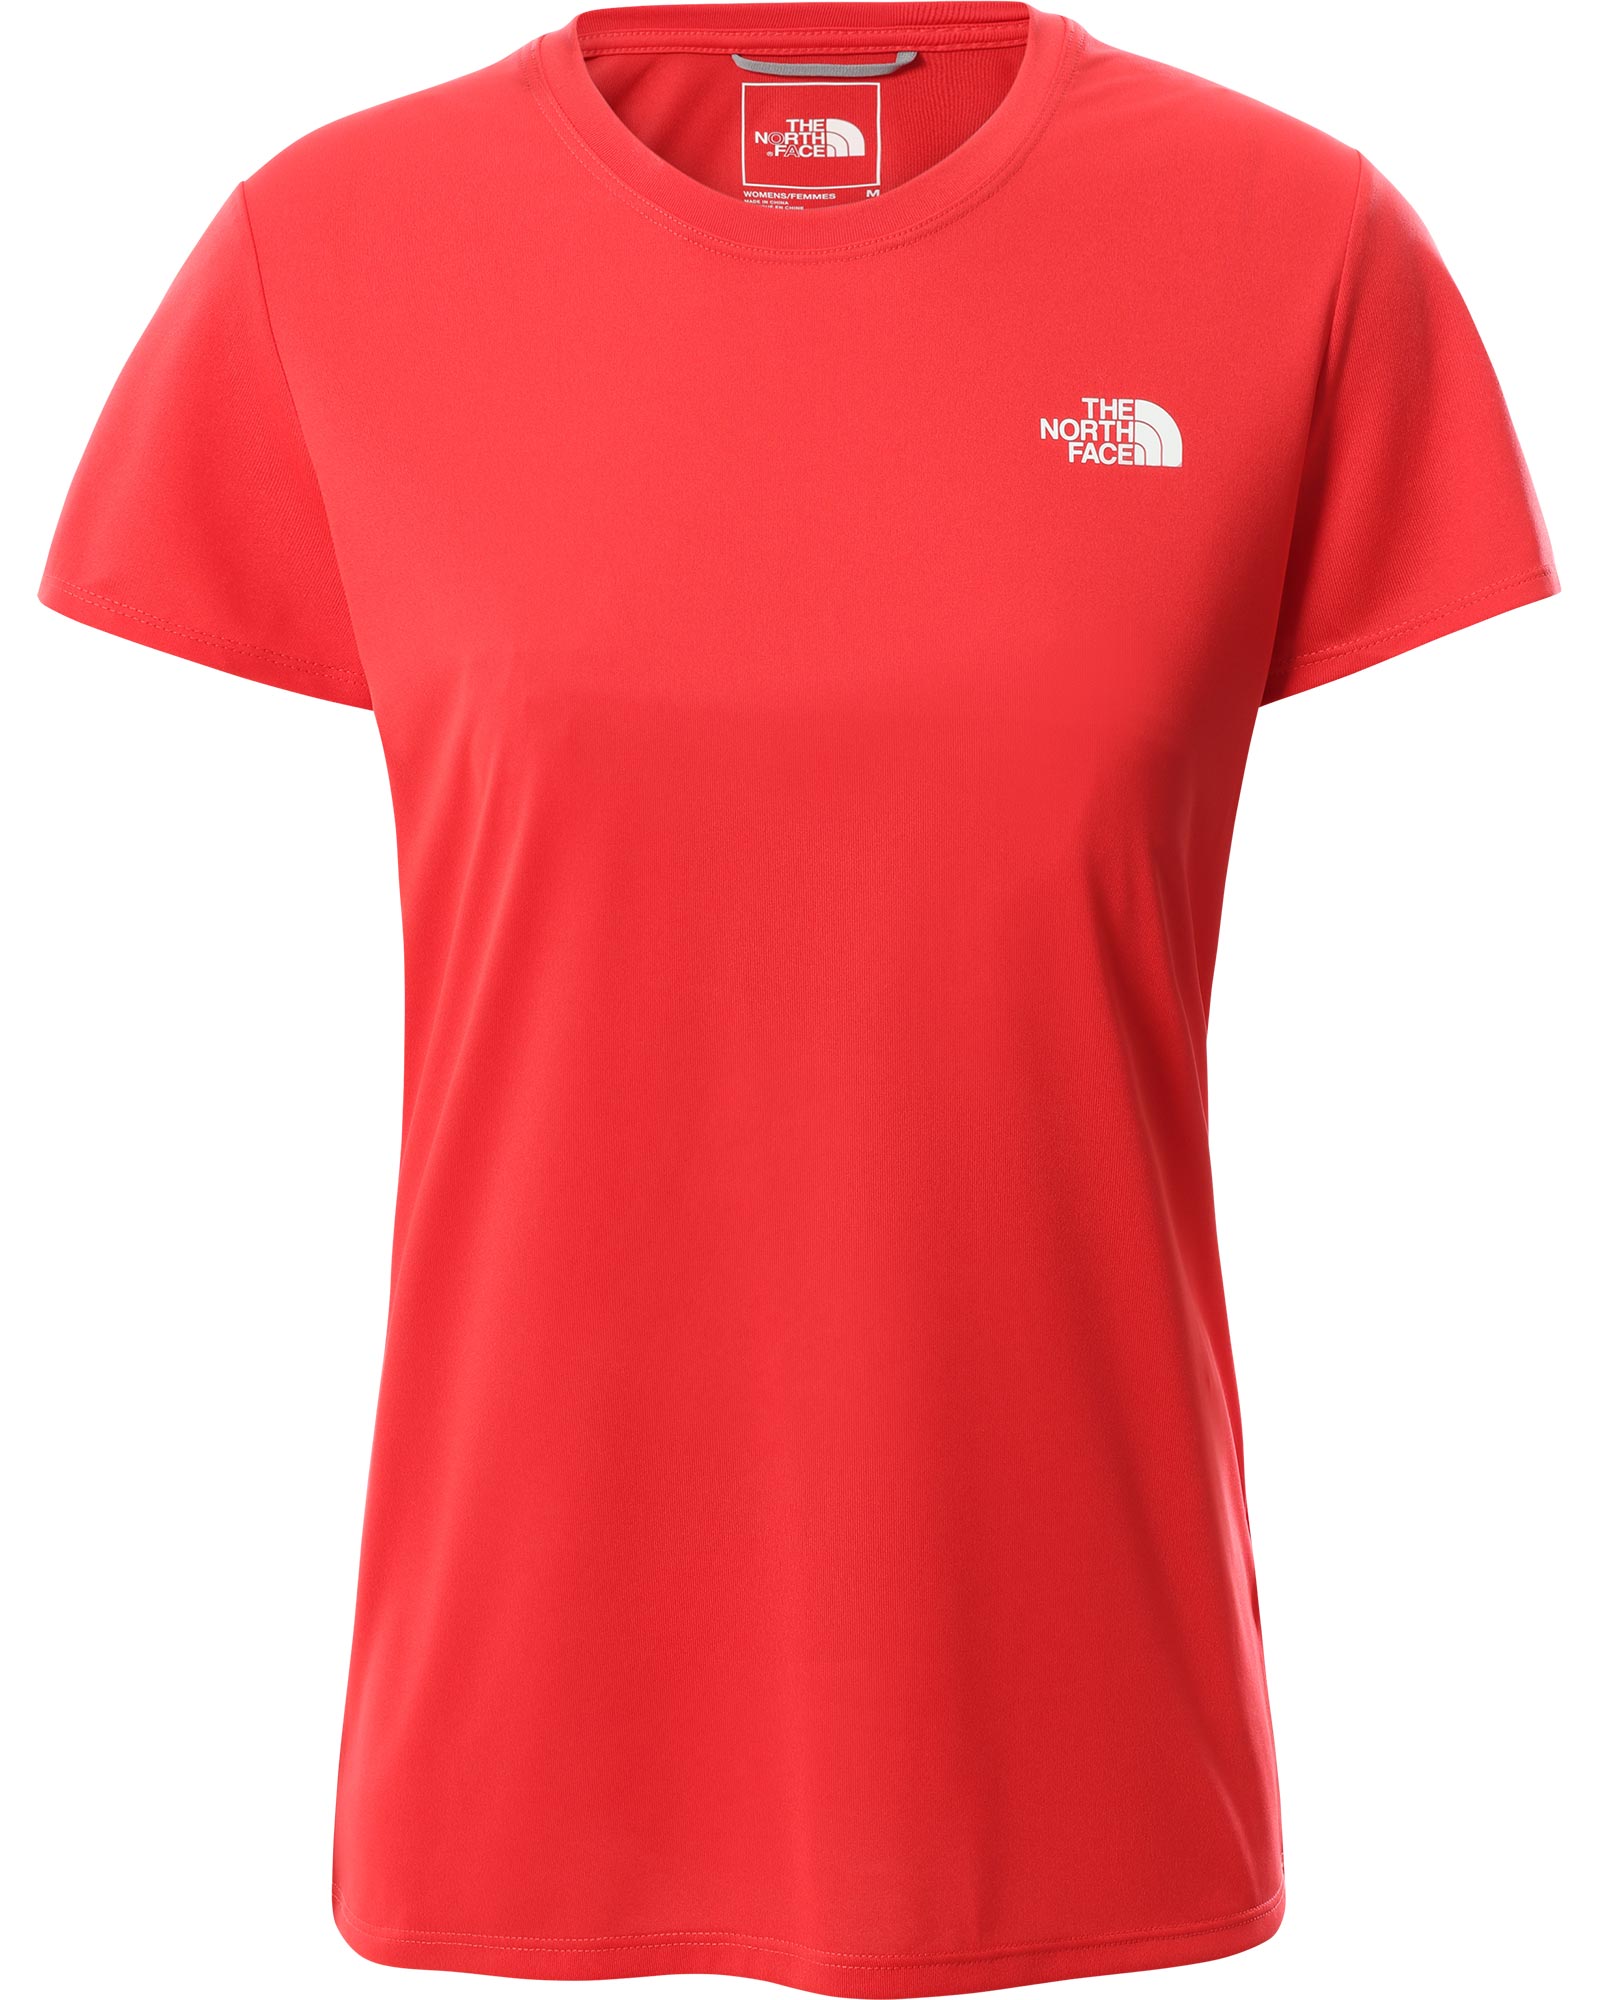 The North Face Women's Reaxion Amp Crew T-Shirt